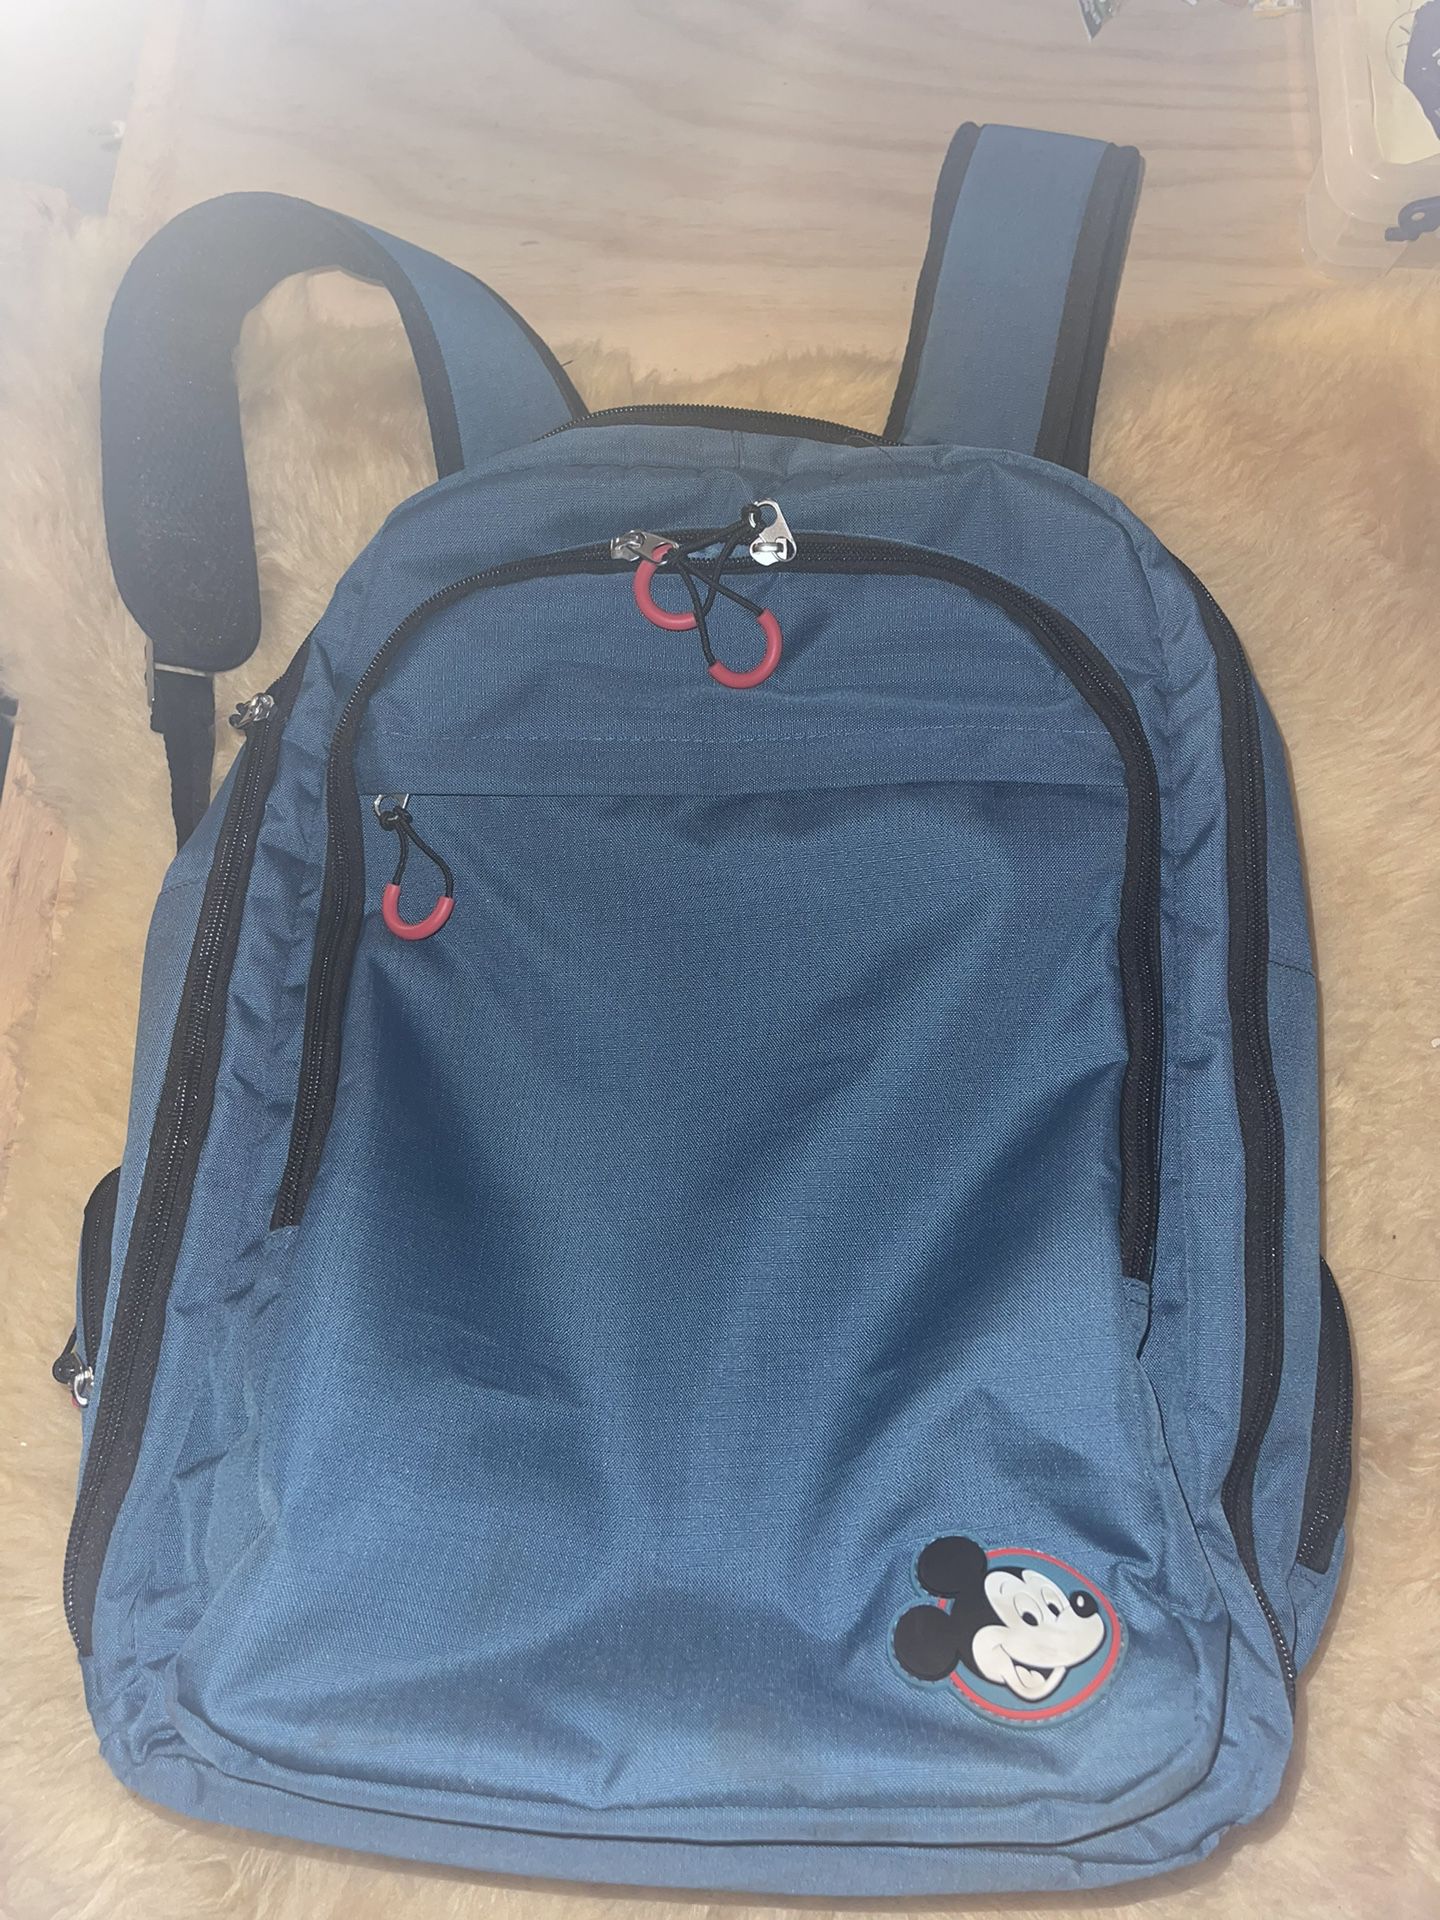 Disney navy blue micky mouse backpack for Sale in Garden Grove